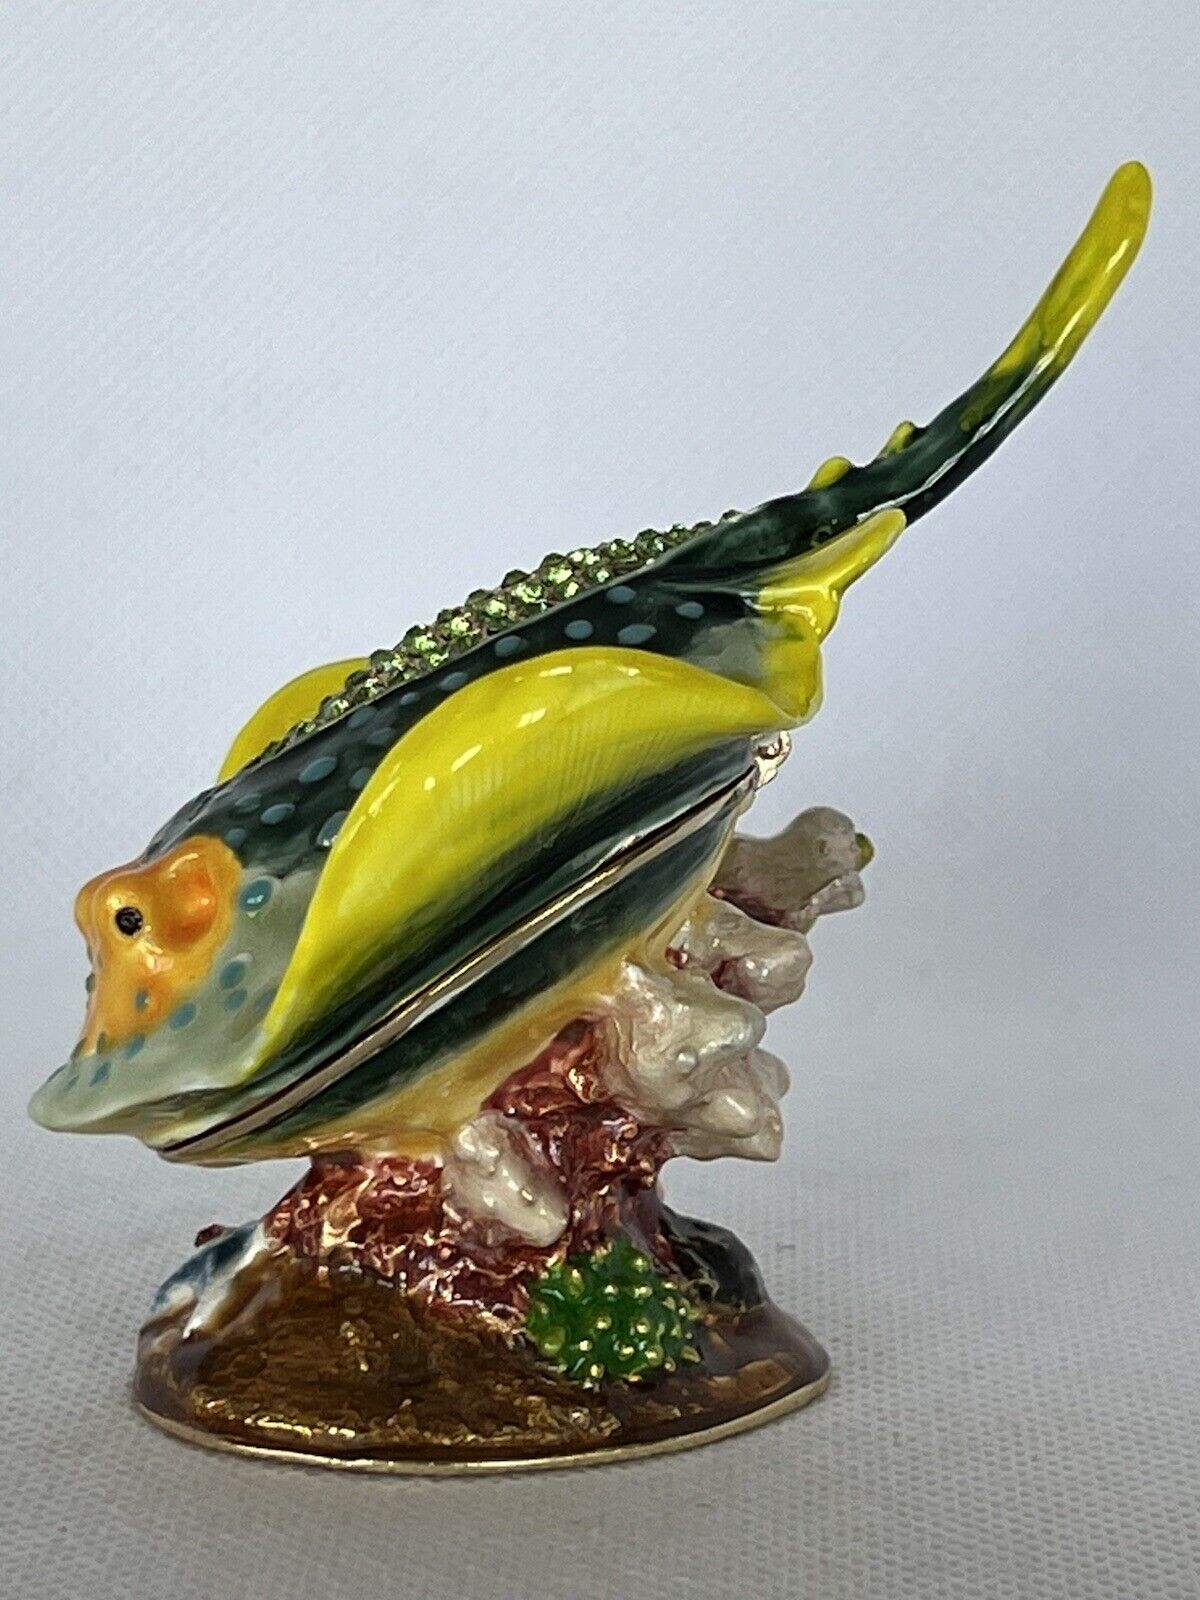 Stingray by Ciel Collectables Hand Painted Enamel with swarovski Crystals